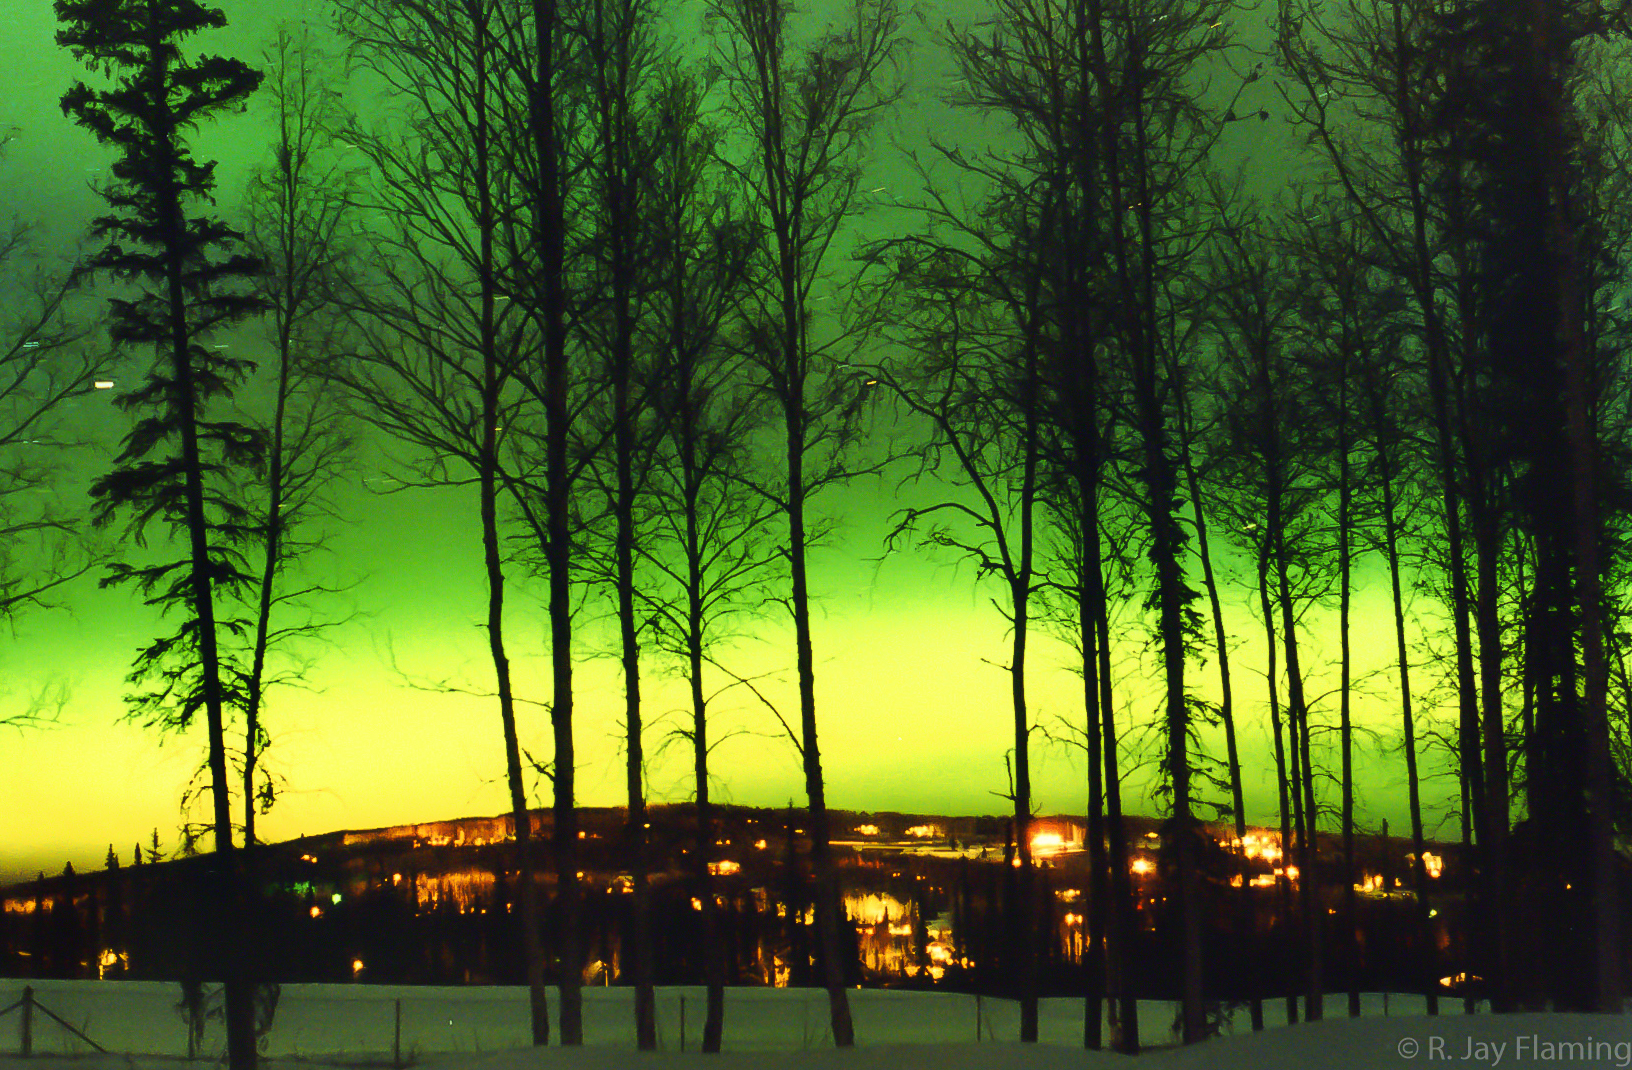 The Northern Lights in Fairbanks above a snow covered golf course in winter. Trees are silouetted in the foreground and lights from houses are seen on a hillside in the background.